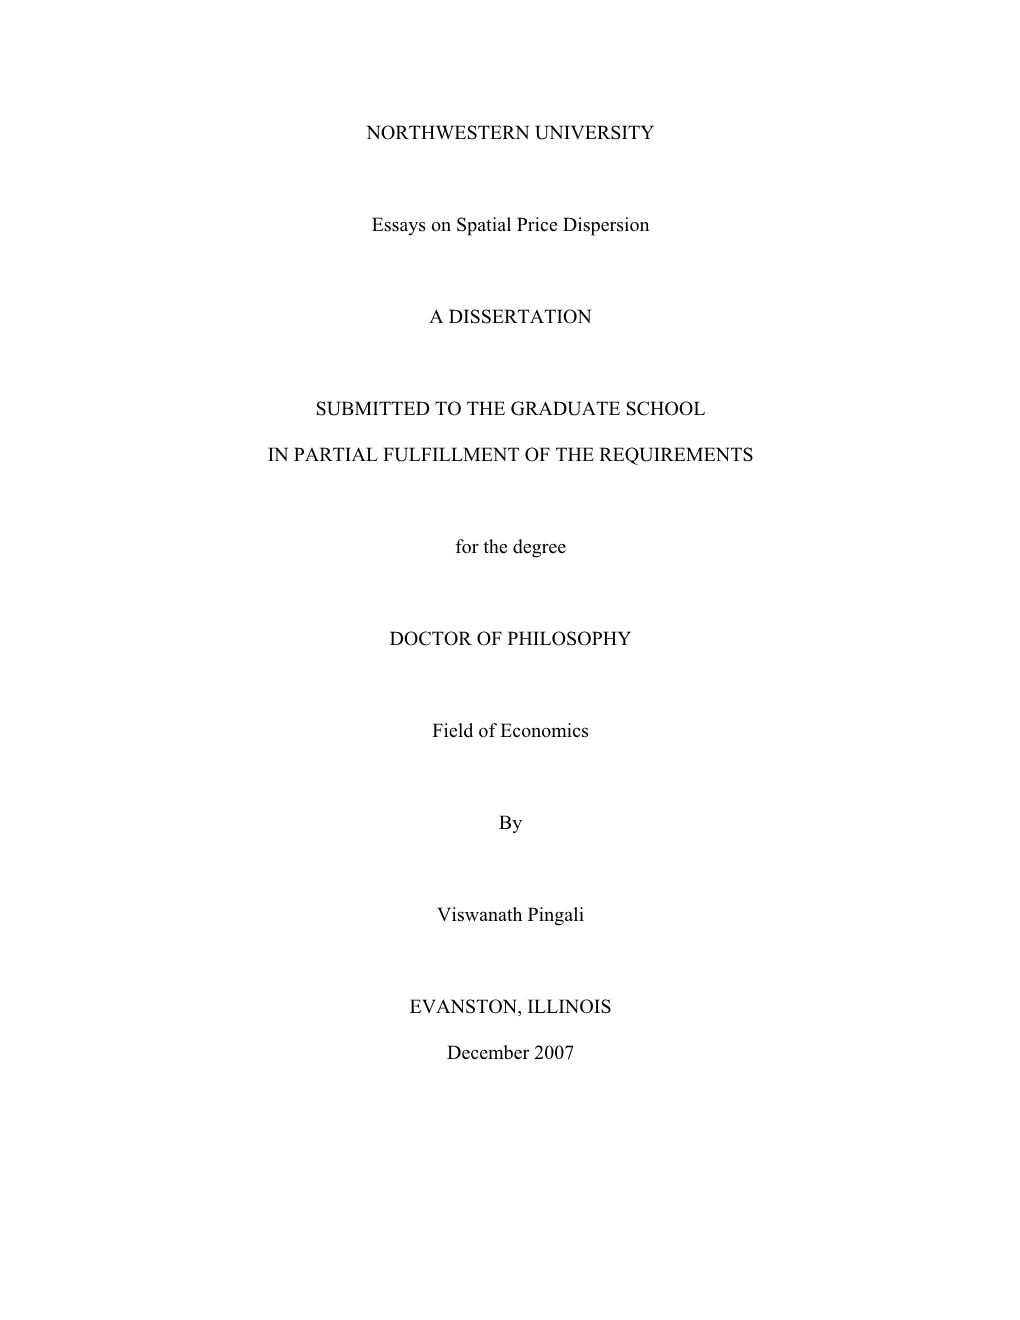 NORTHWESTERN UNIVERSITY Essays on Spatial Price Dispersion a DISSERTATION SUBMITTED to the GRADUATE SCHOOL in PARTIAL FULFILLMEN